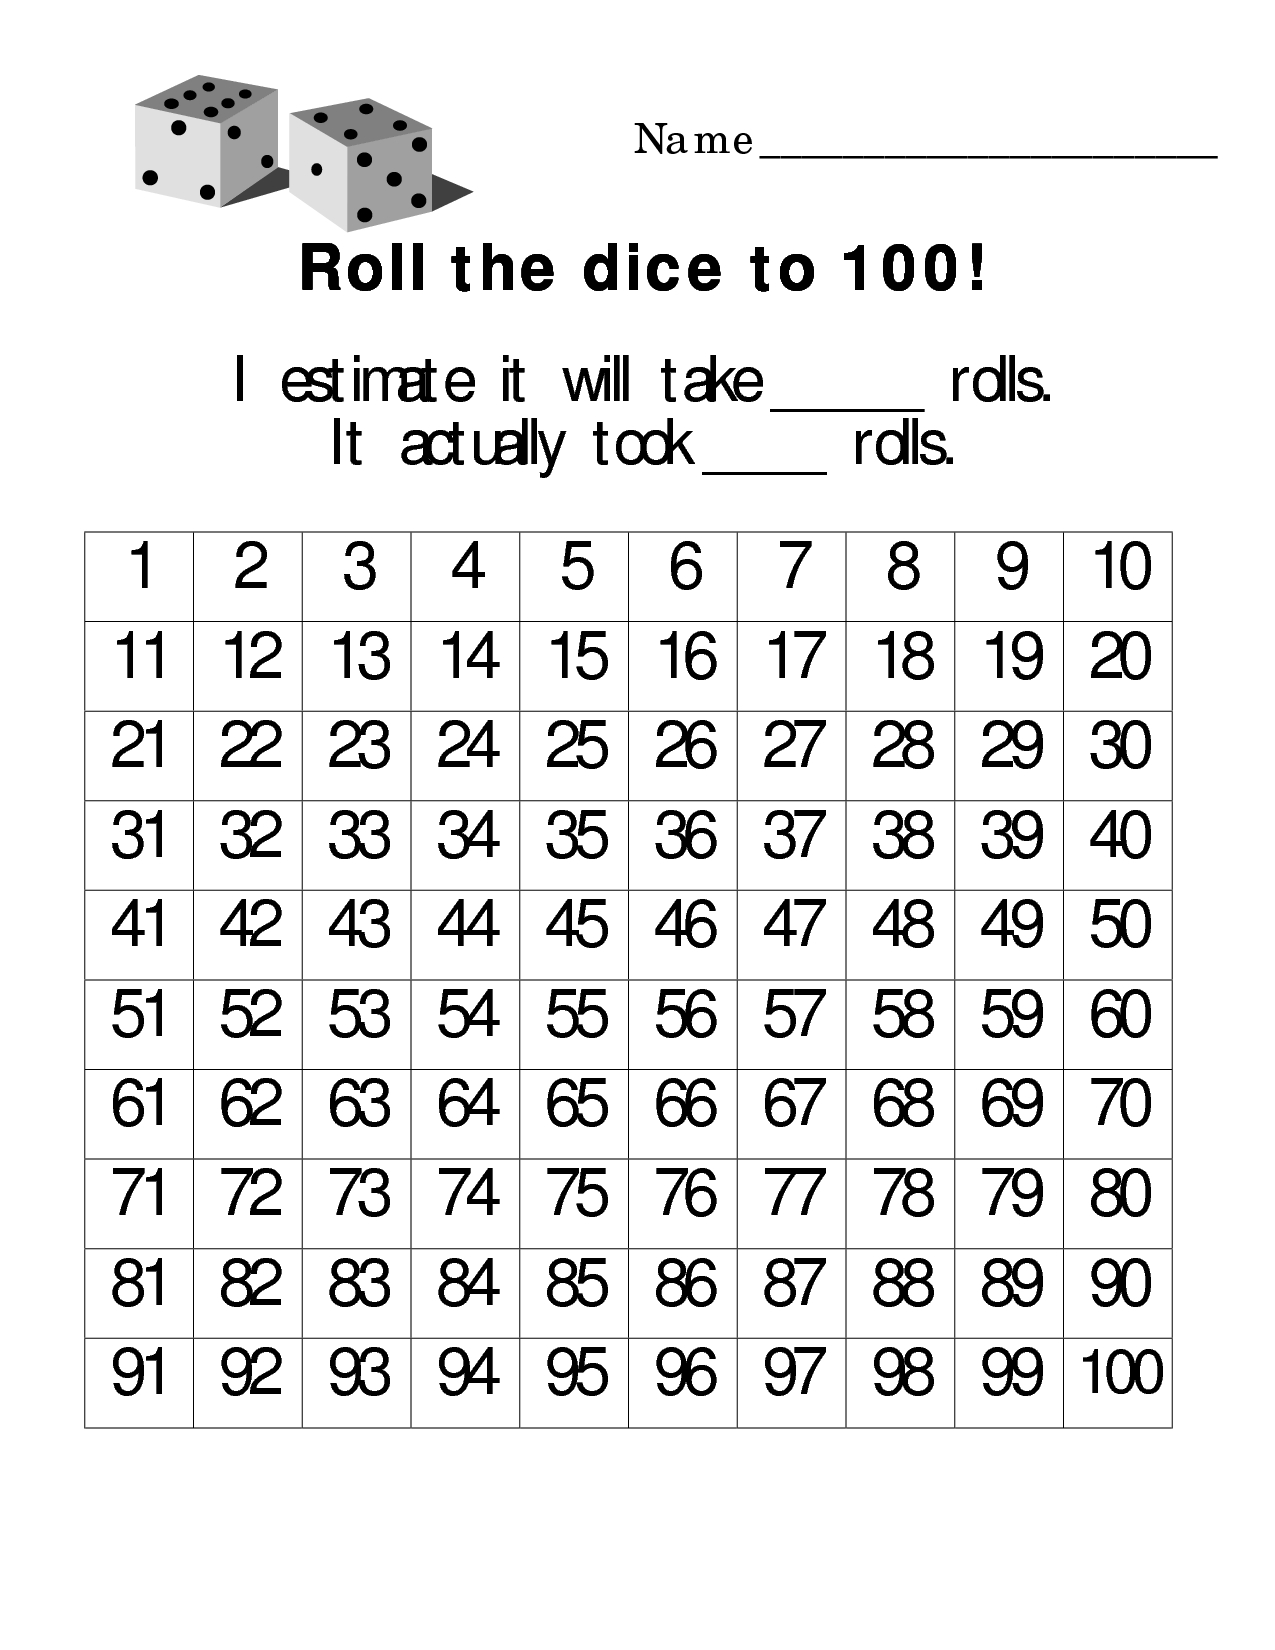 Roll The Dice To 100 -Free Printable | For The Kids - Roll A Monster Free Printable